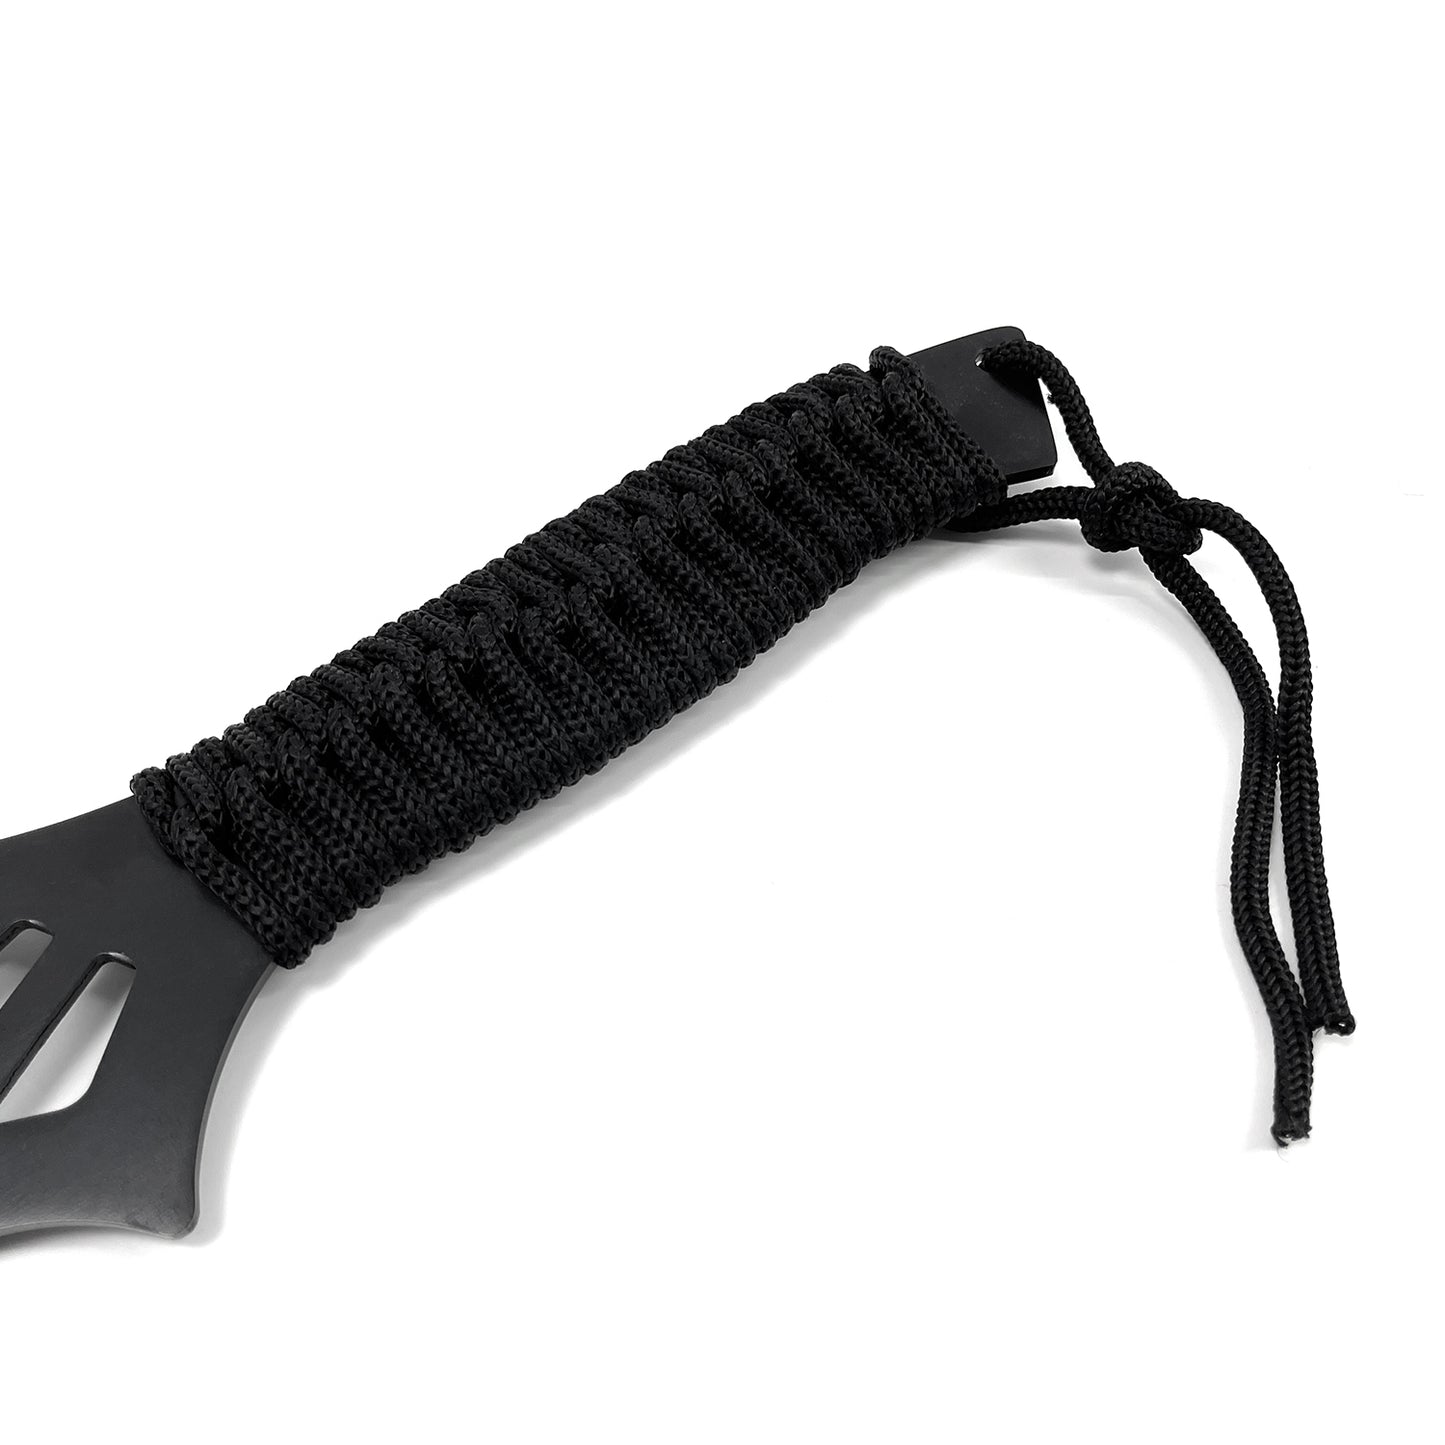 Tactical Master 26" Red Machete & Throwing Knives